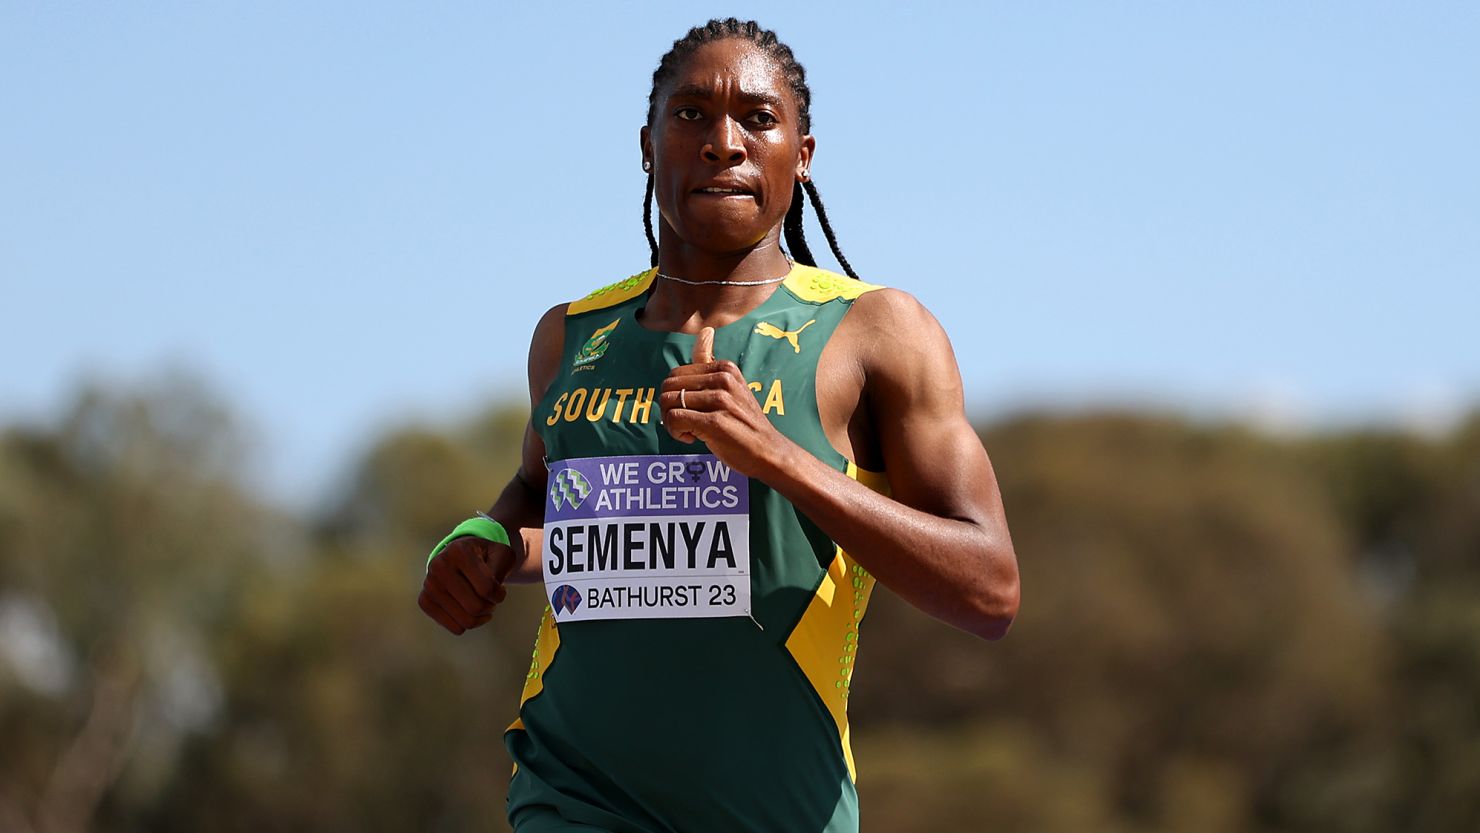 Runner Caster Semenya says she's not done fighting for the right to compete